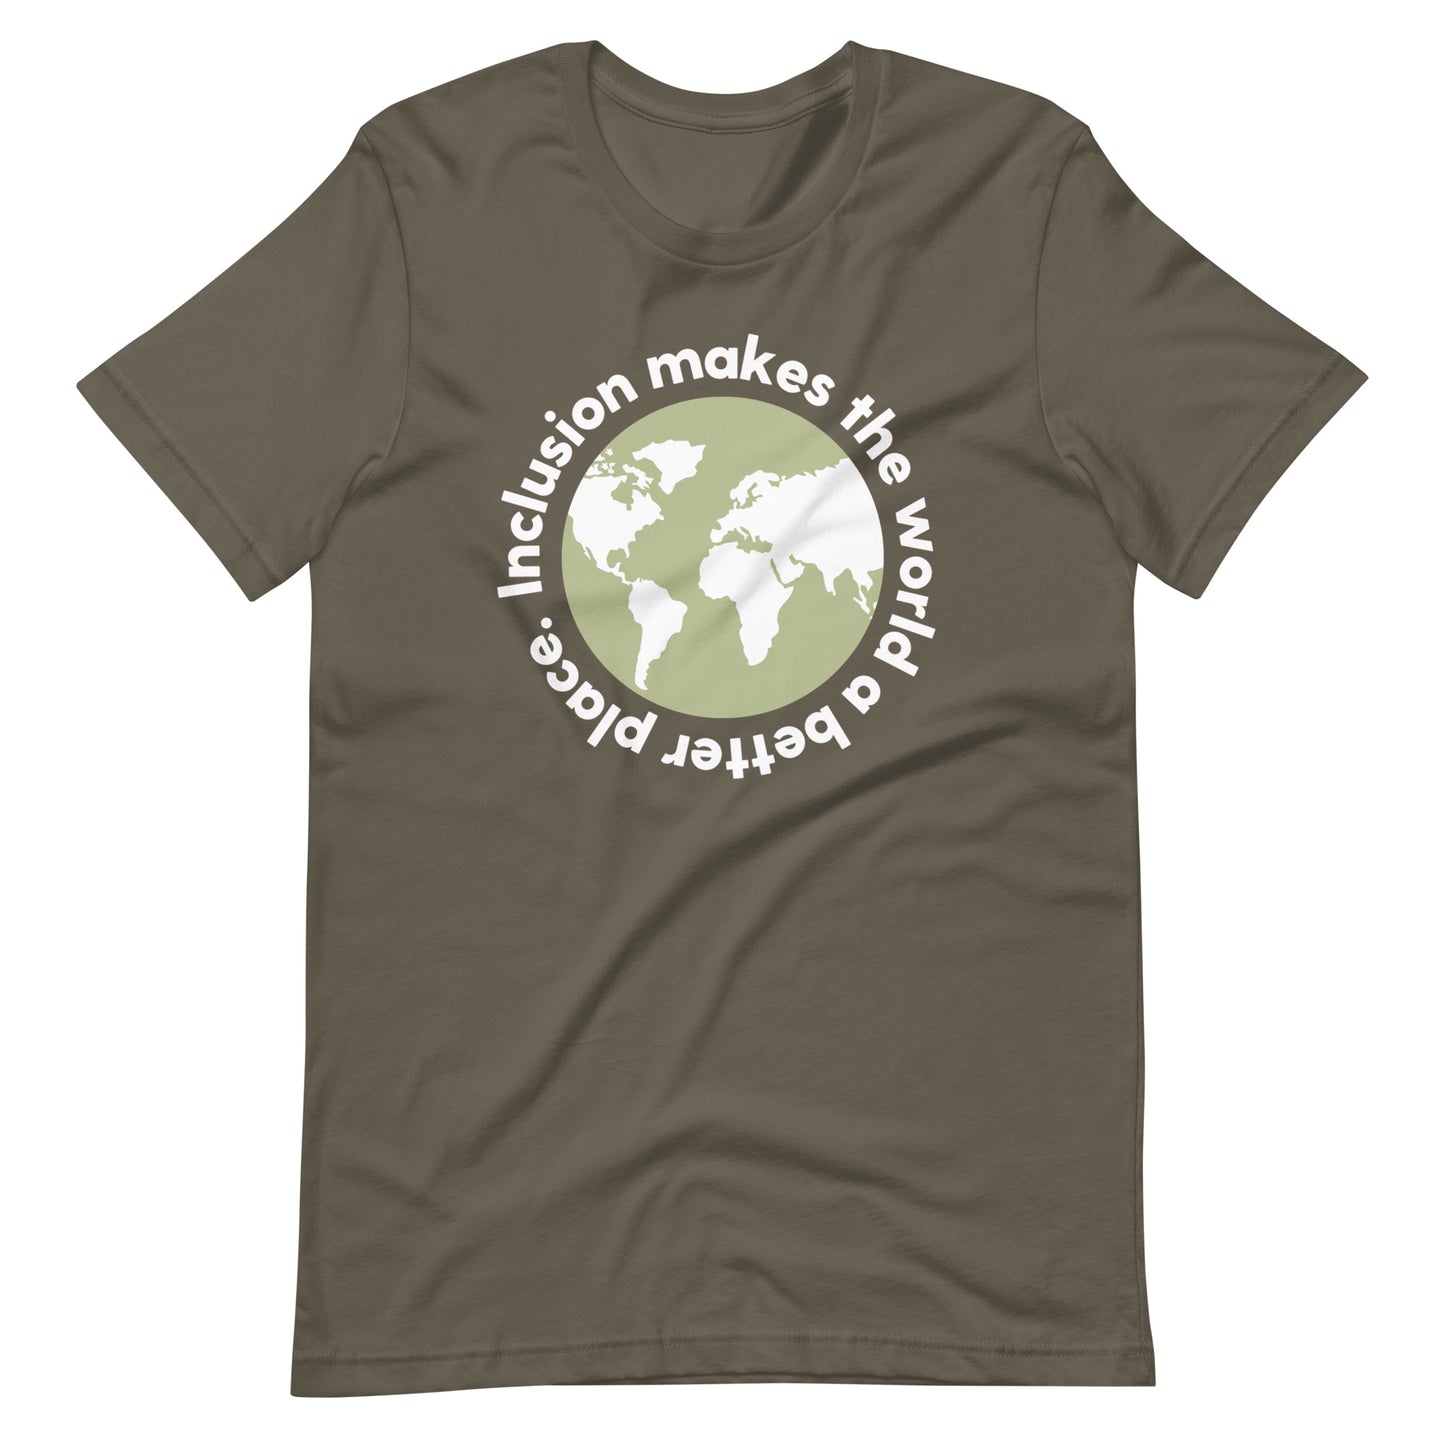 Inclusion Makes the World a Better Place | Adult Unisex Tee